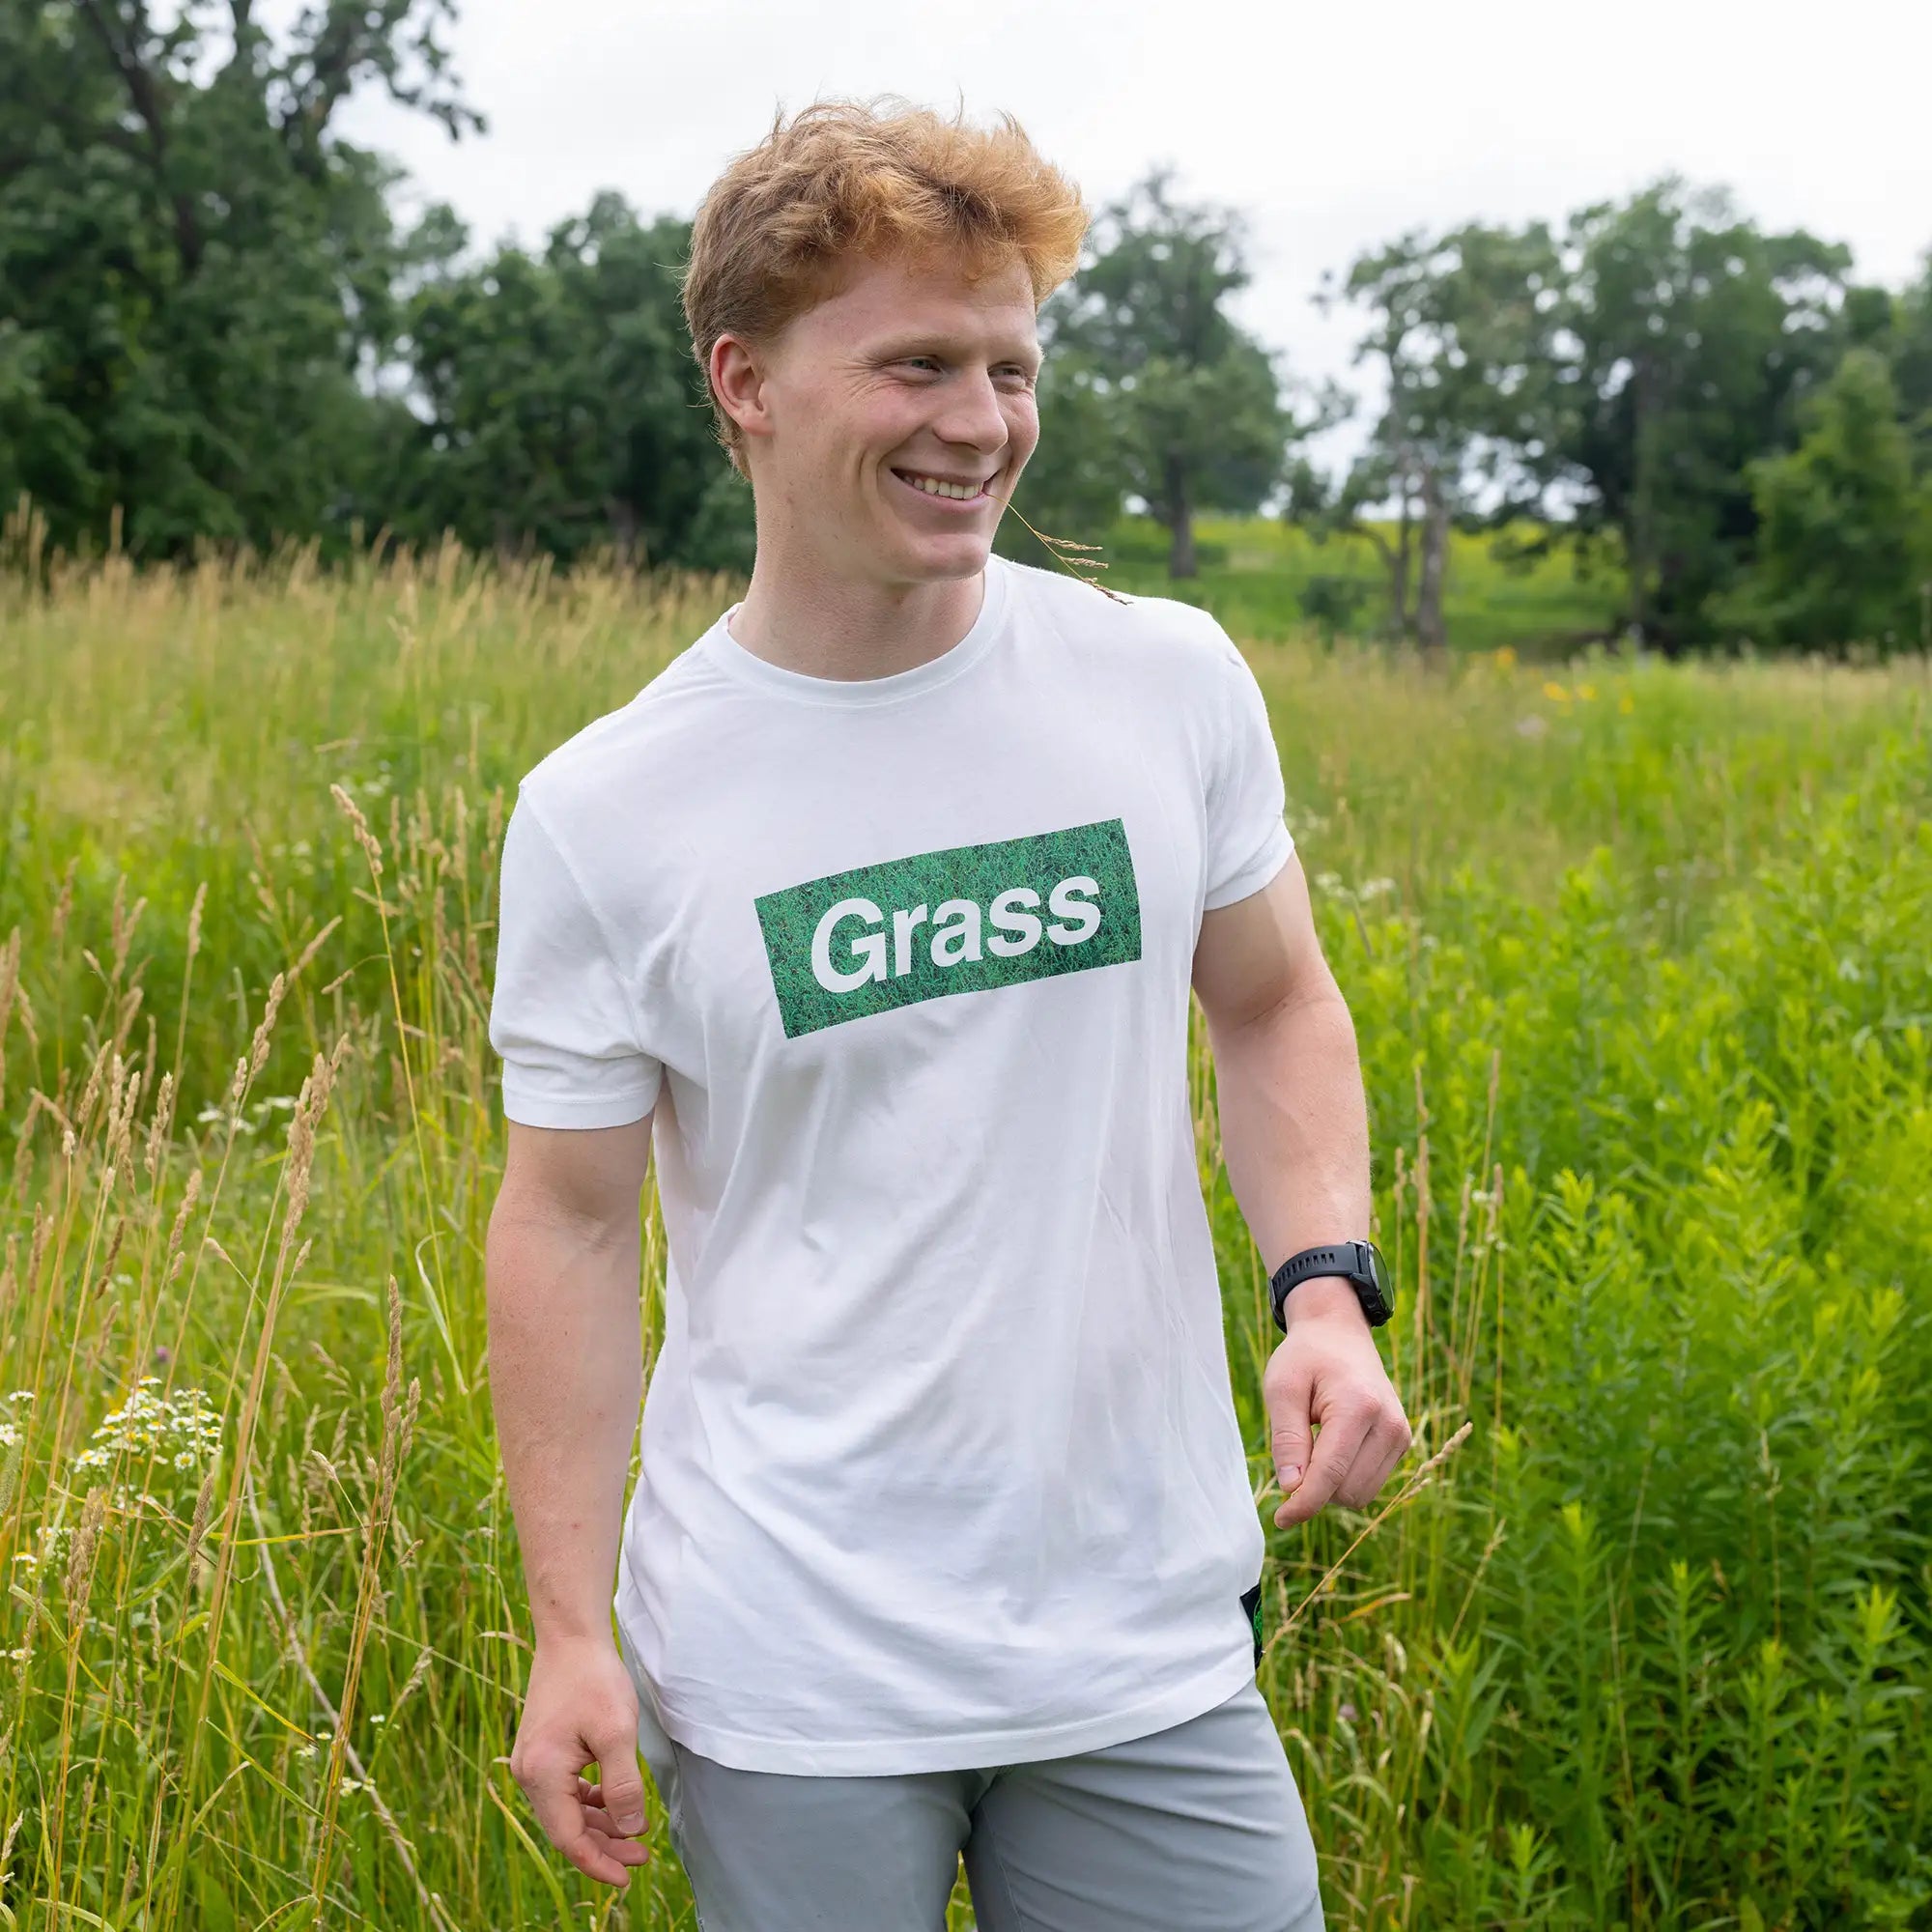 Grass Tee in White color